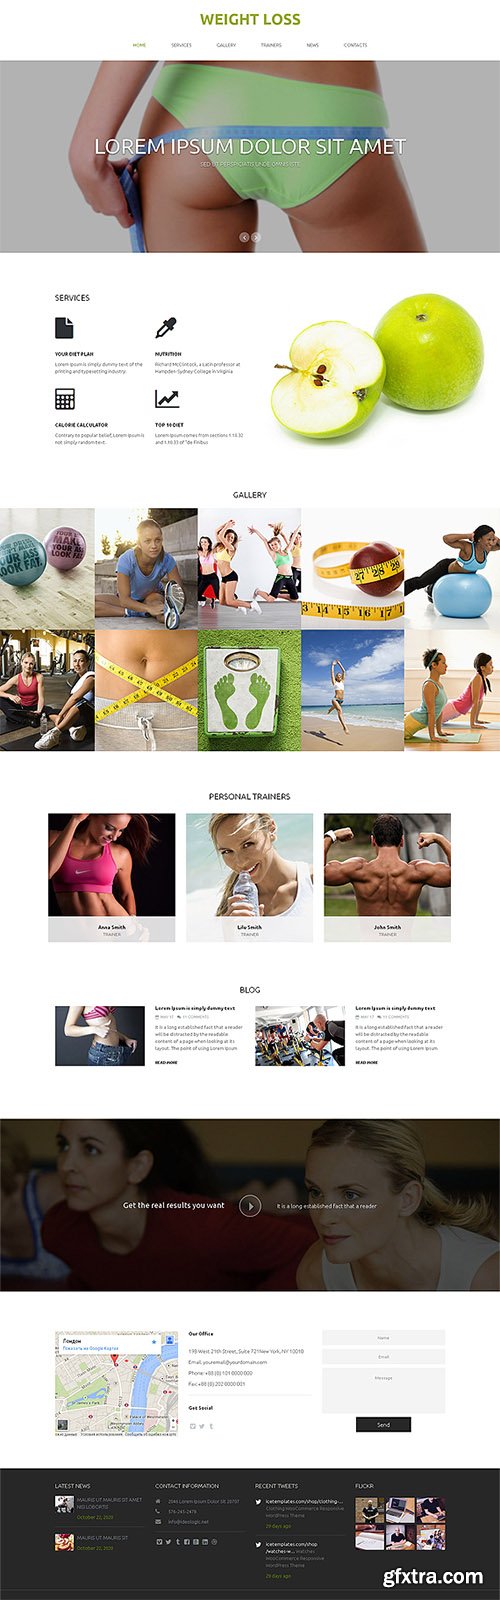 CreativeMarket - Weight Loss One Page Theme